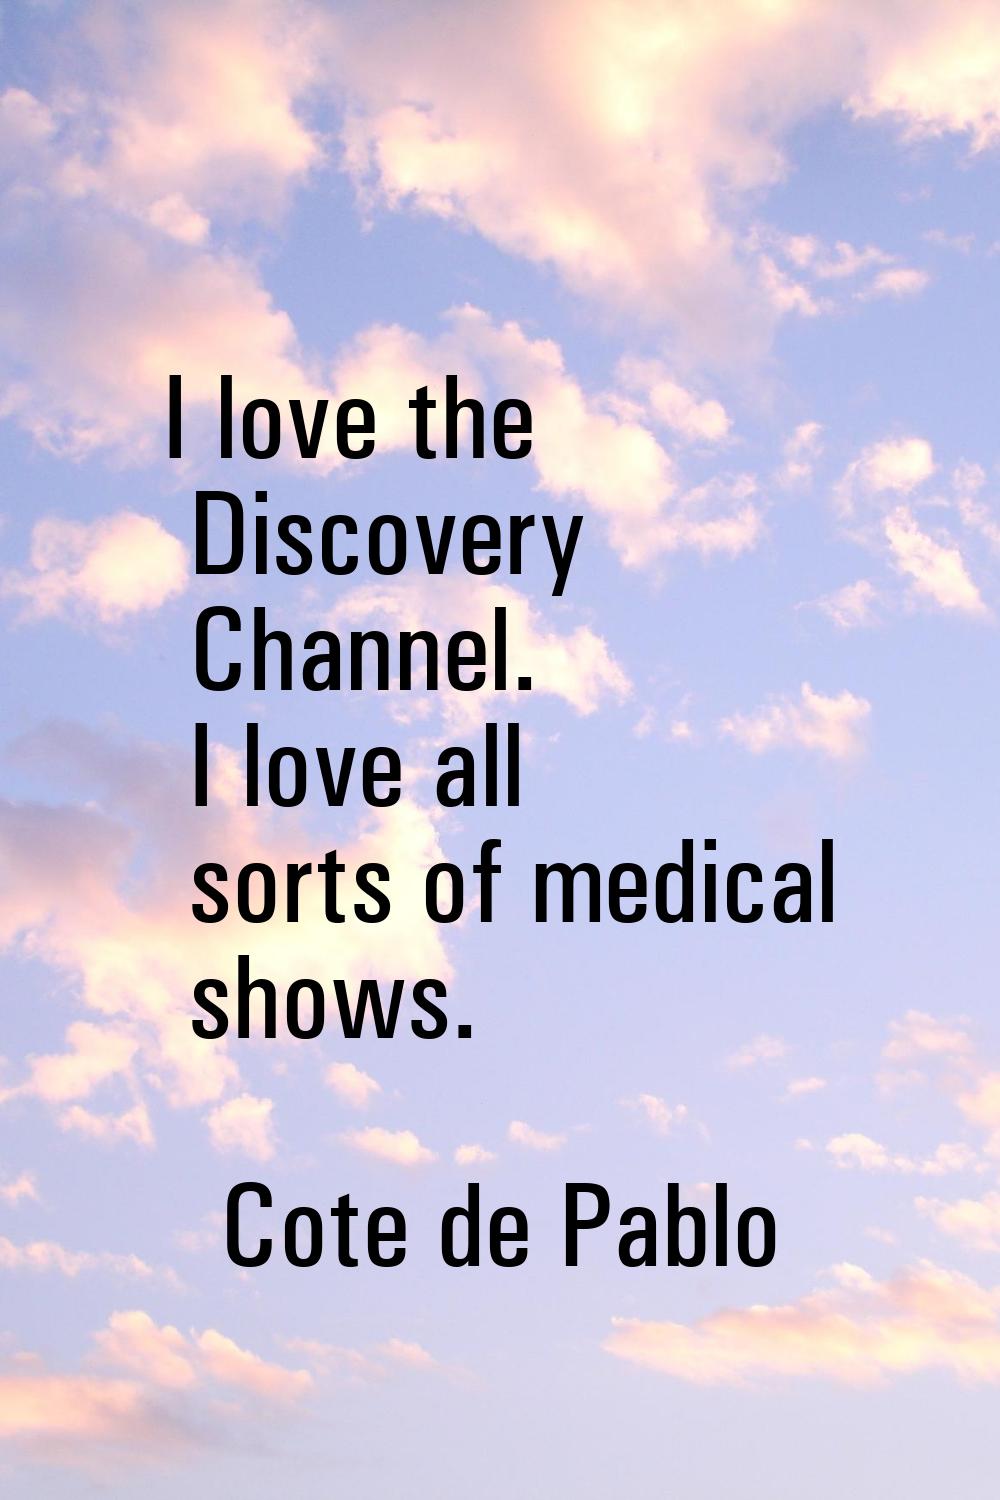 I love the Discovery Channel. I love all sorts of medical shows.